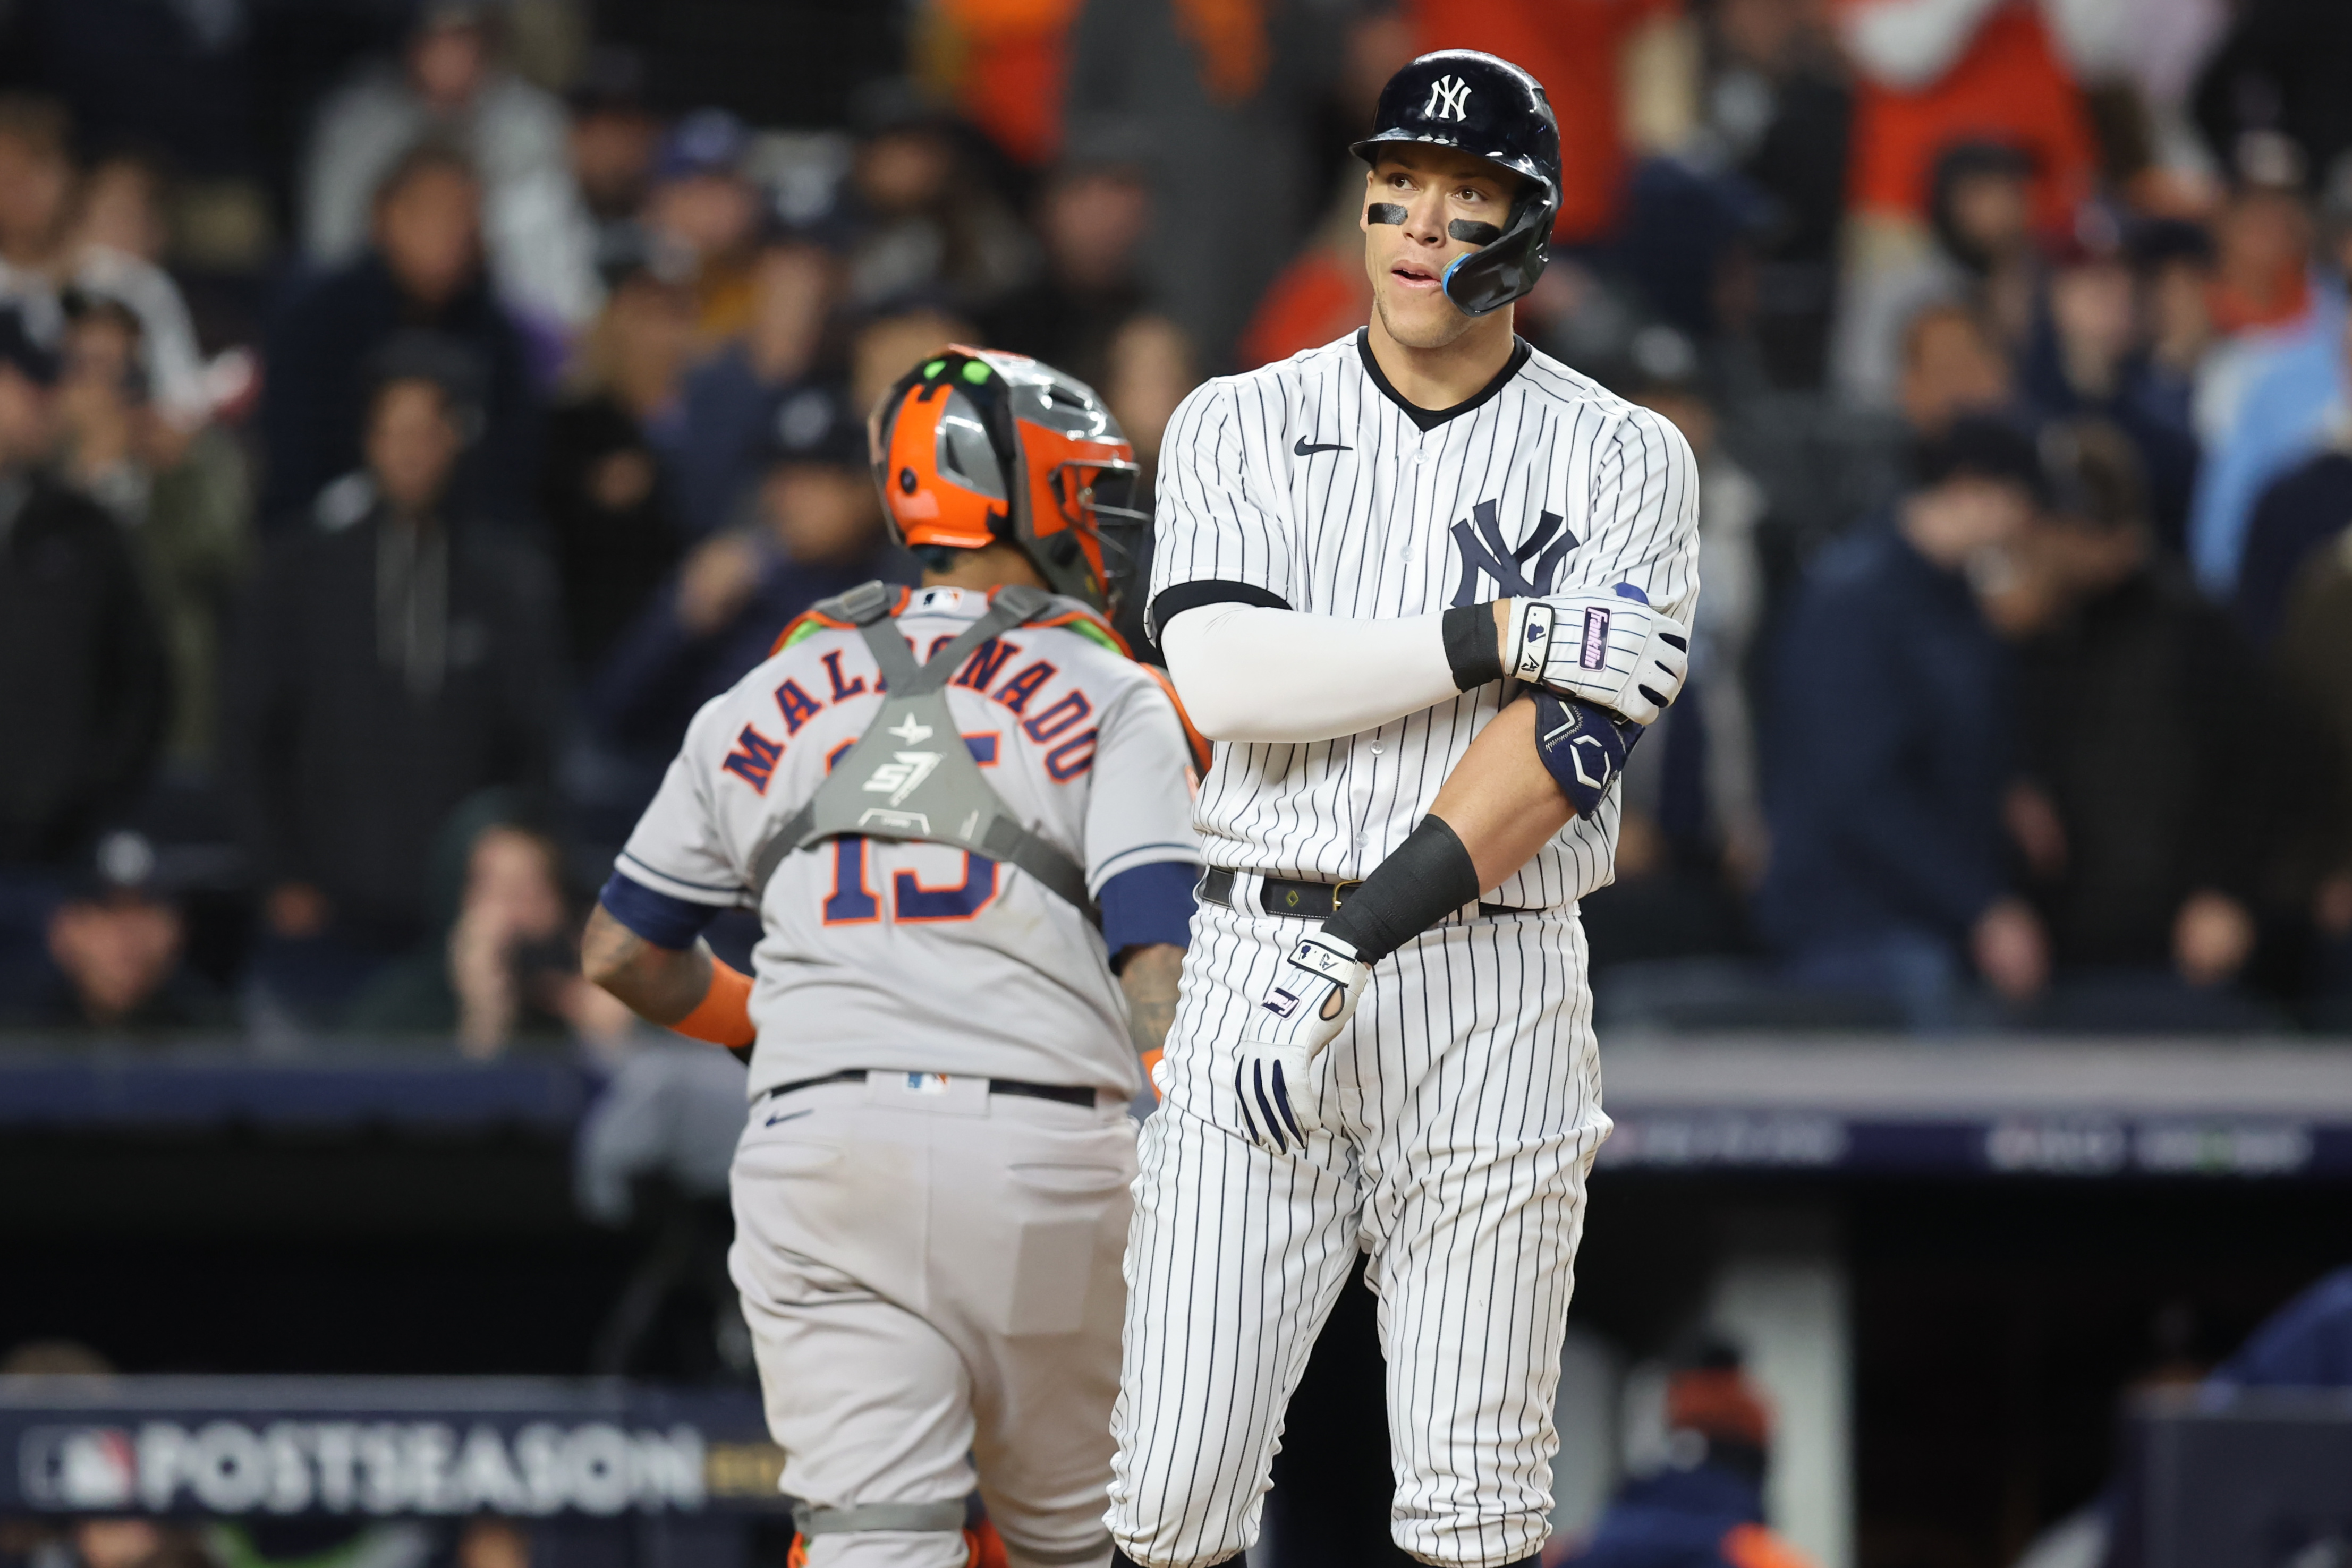 Where Will Aaron Judge Play Next?